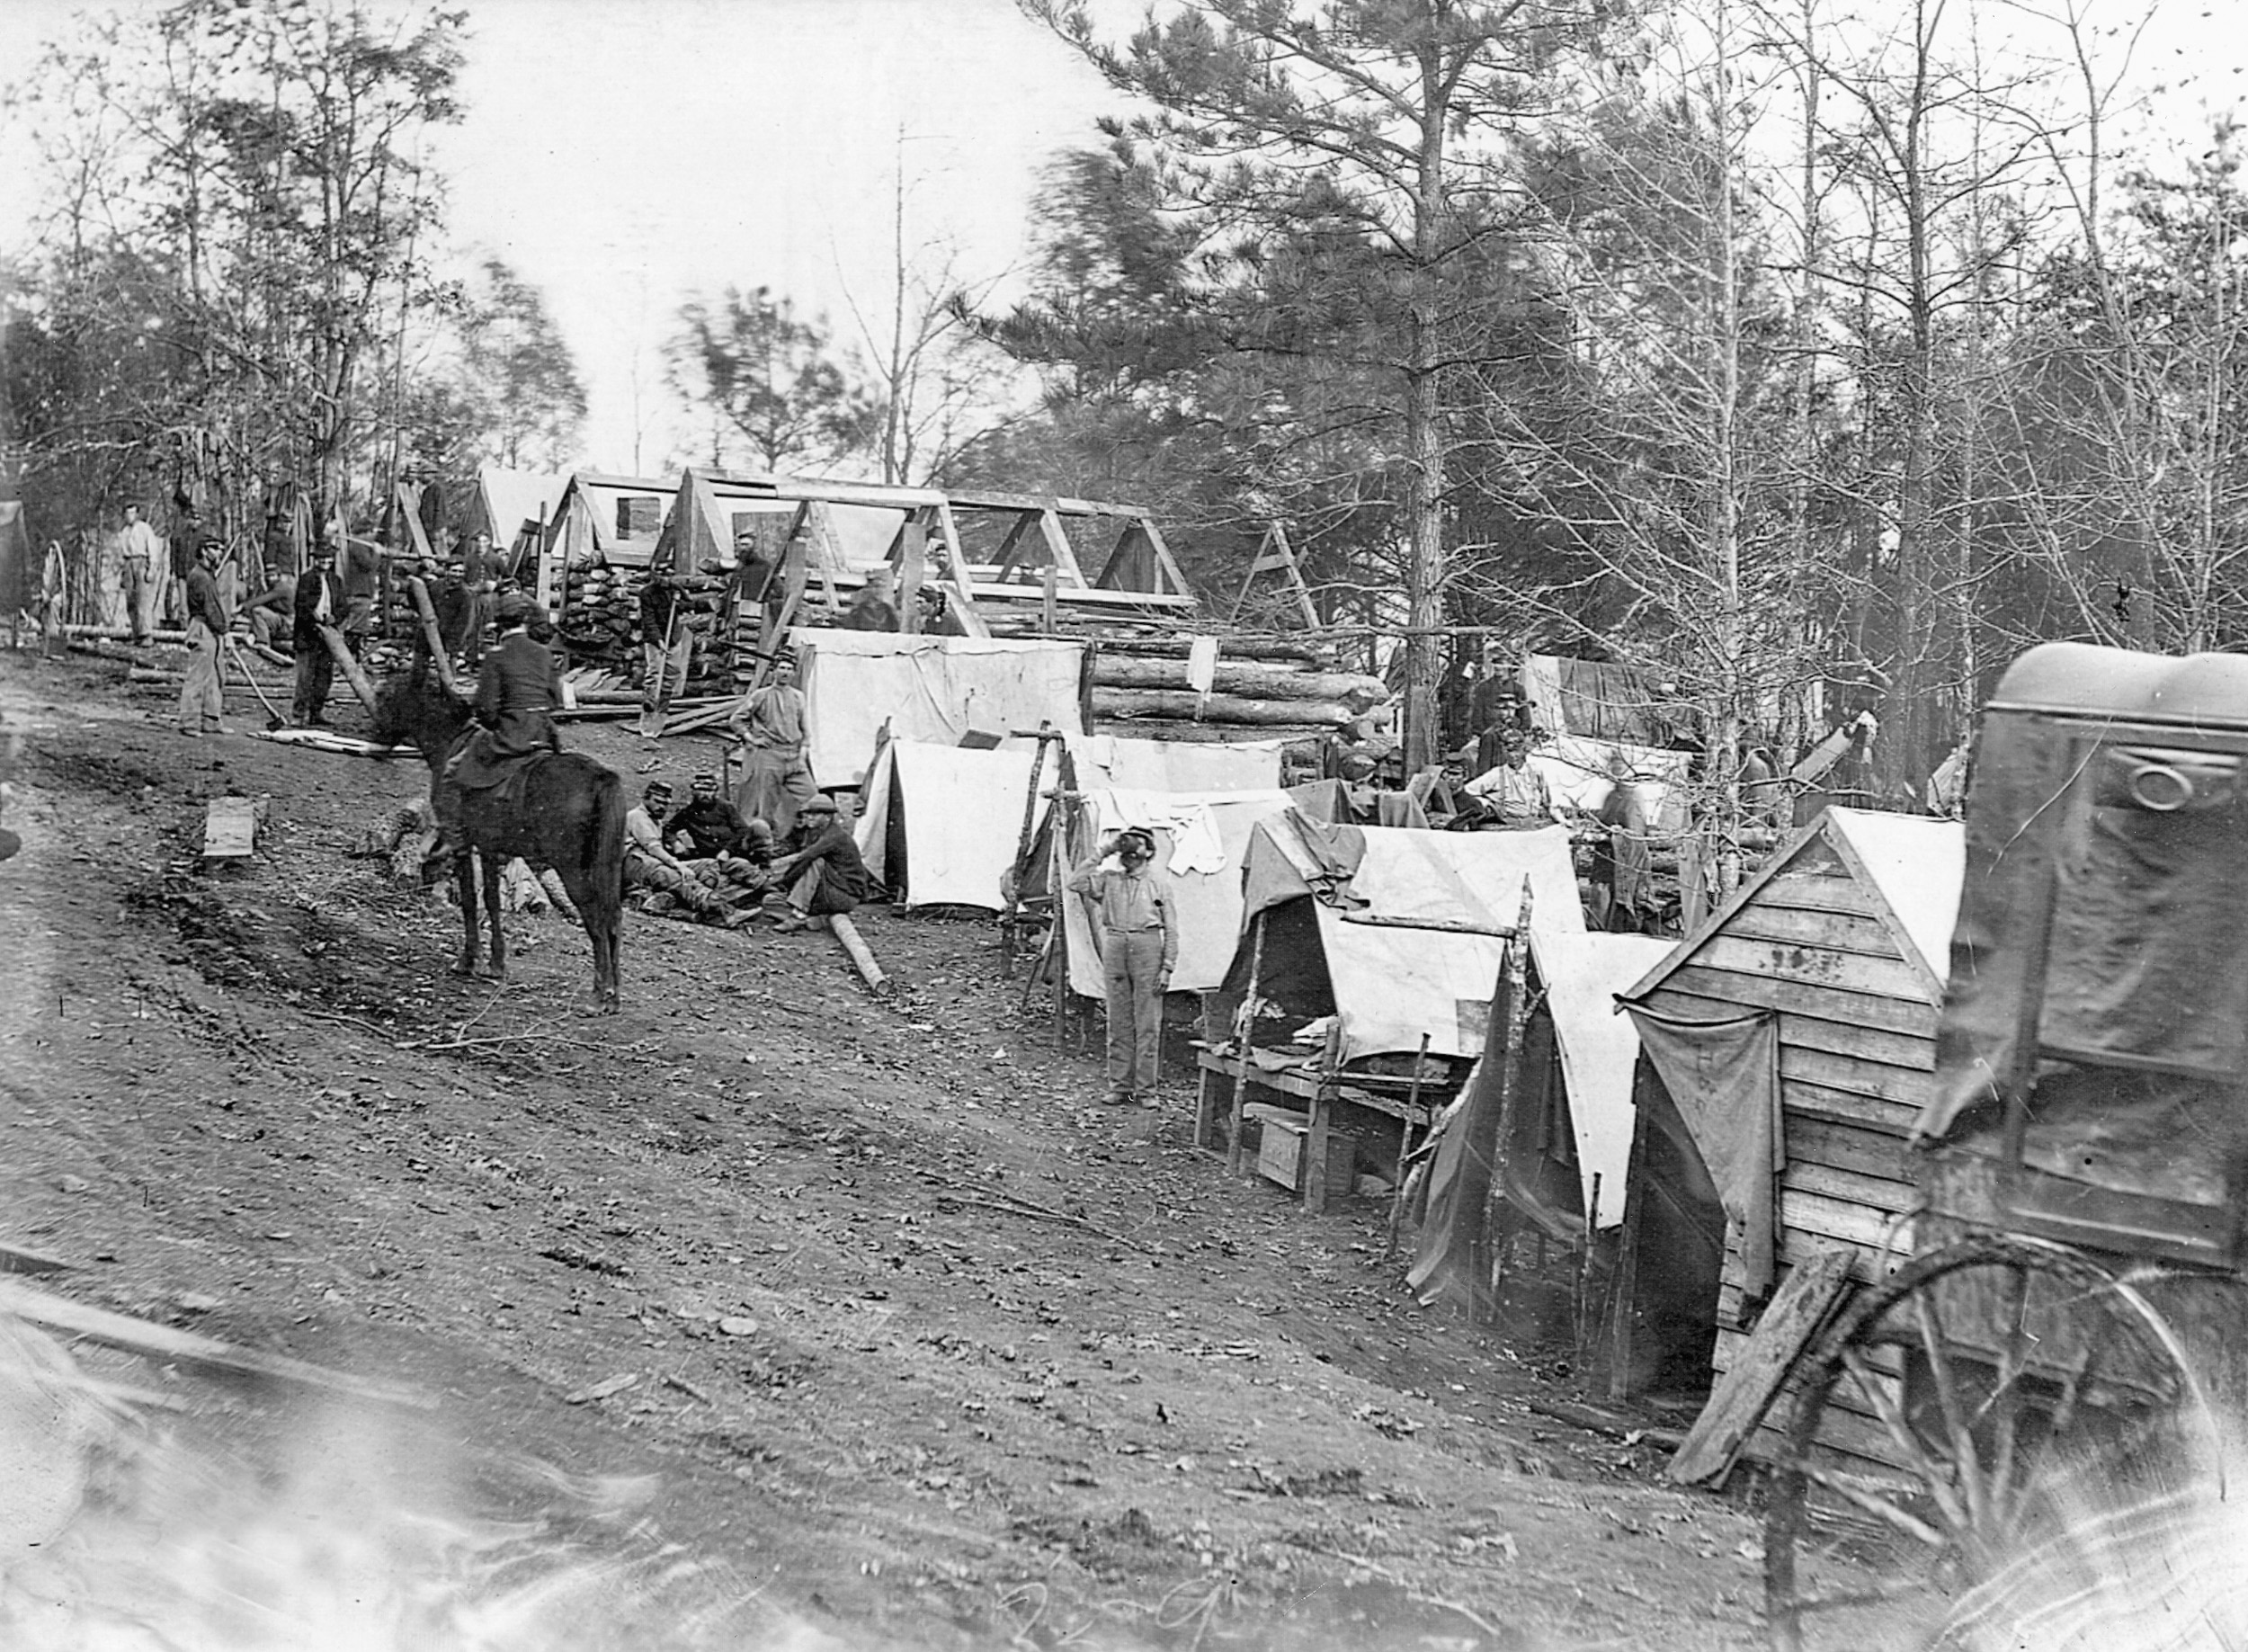 Soldiers construct log huts from nearby trees. One soldier takes a drink (center) while others split timbers (left) as a mounted officer looks on.